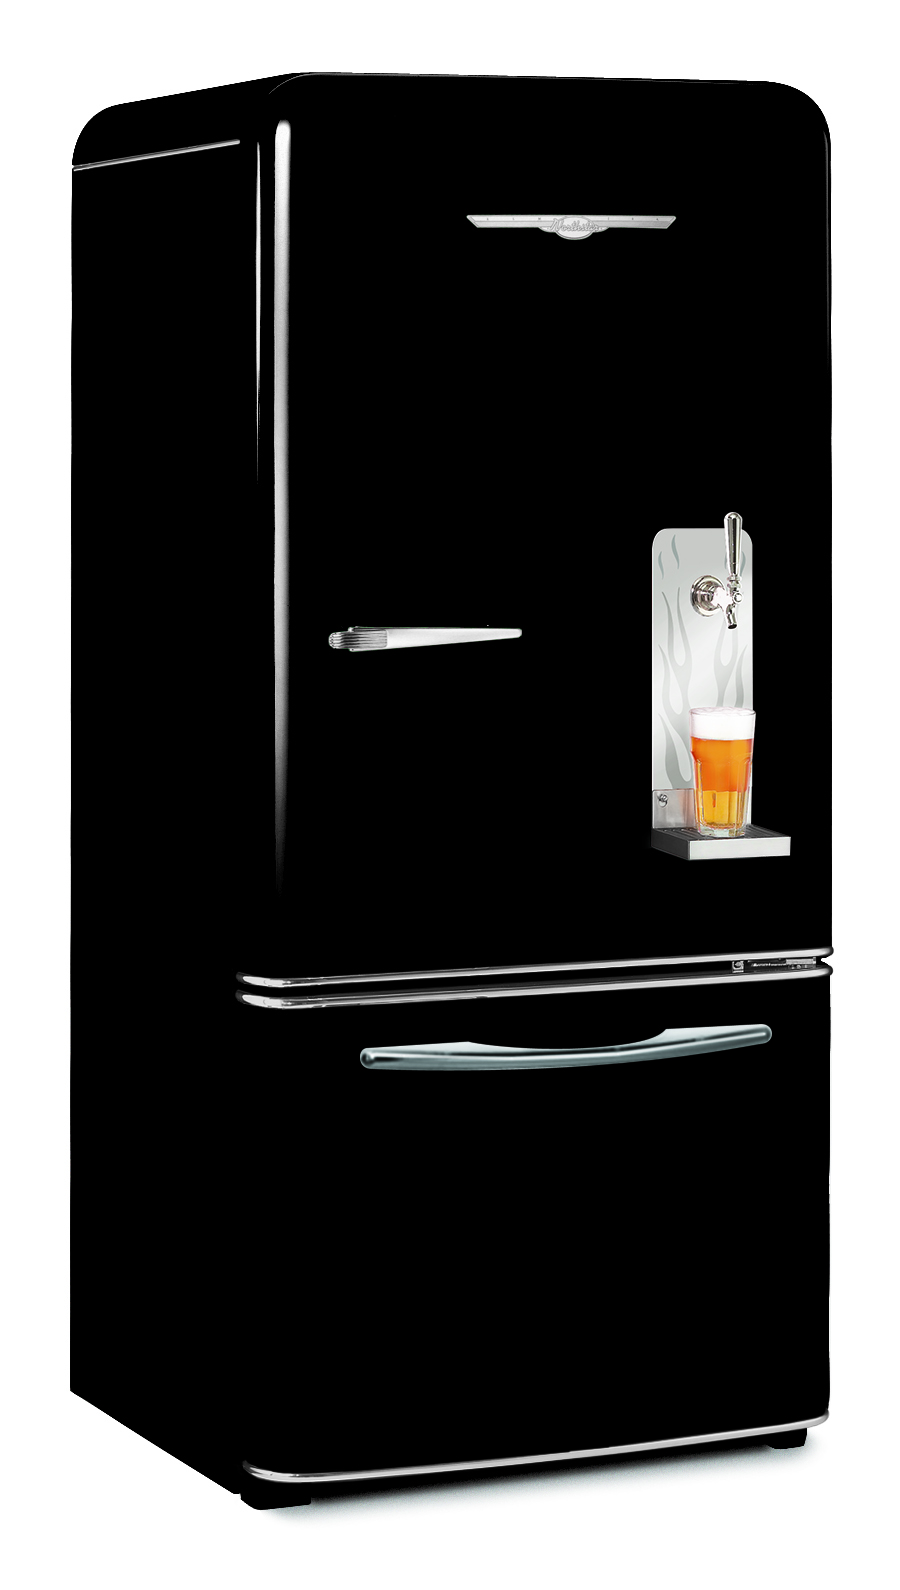 Turn your recreation room into the ‘coolest space on the block’
with a retro fridge with draft beer system